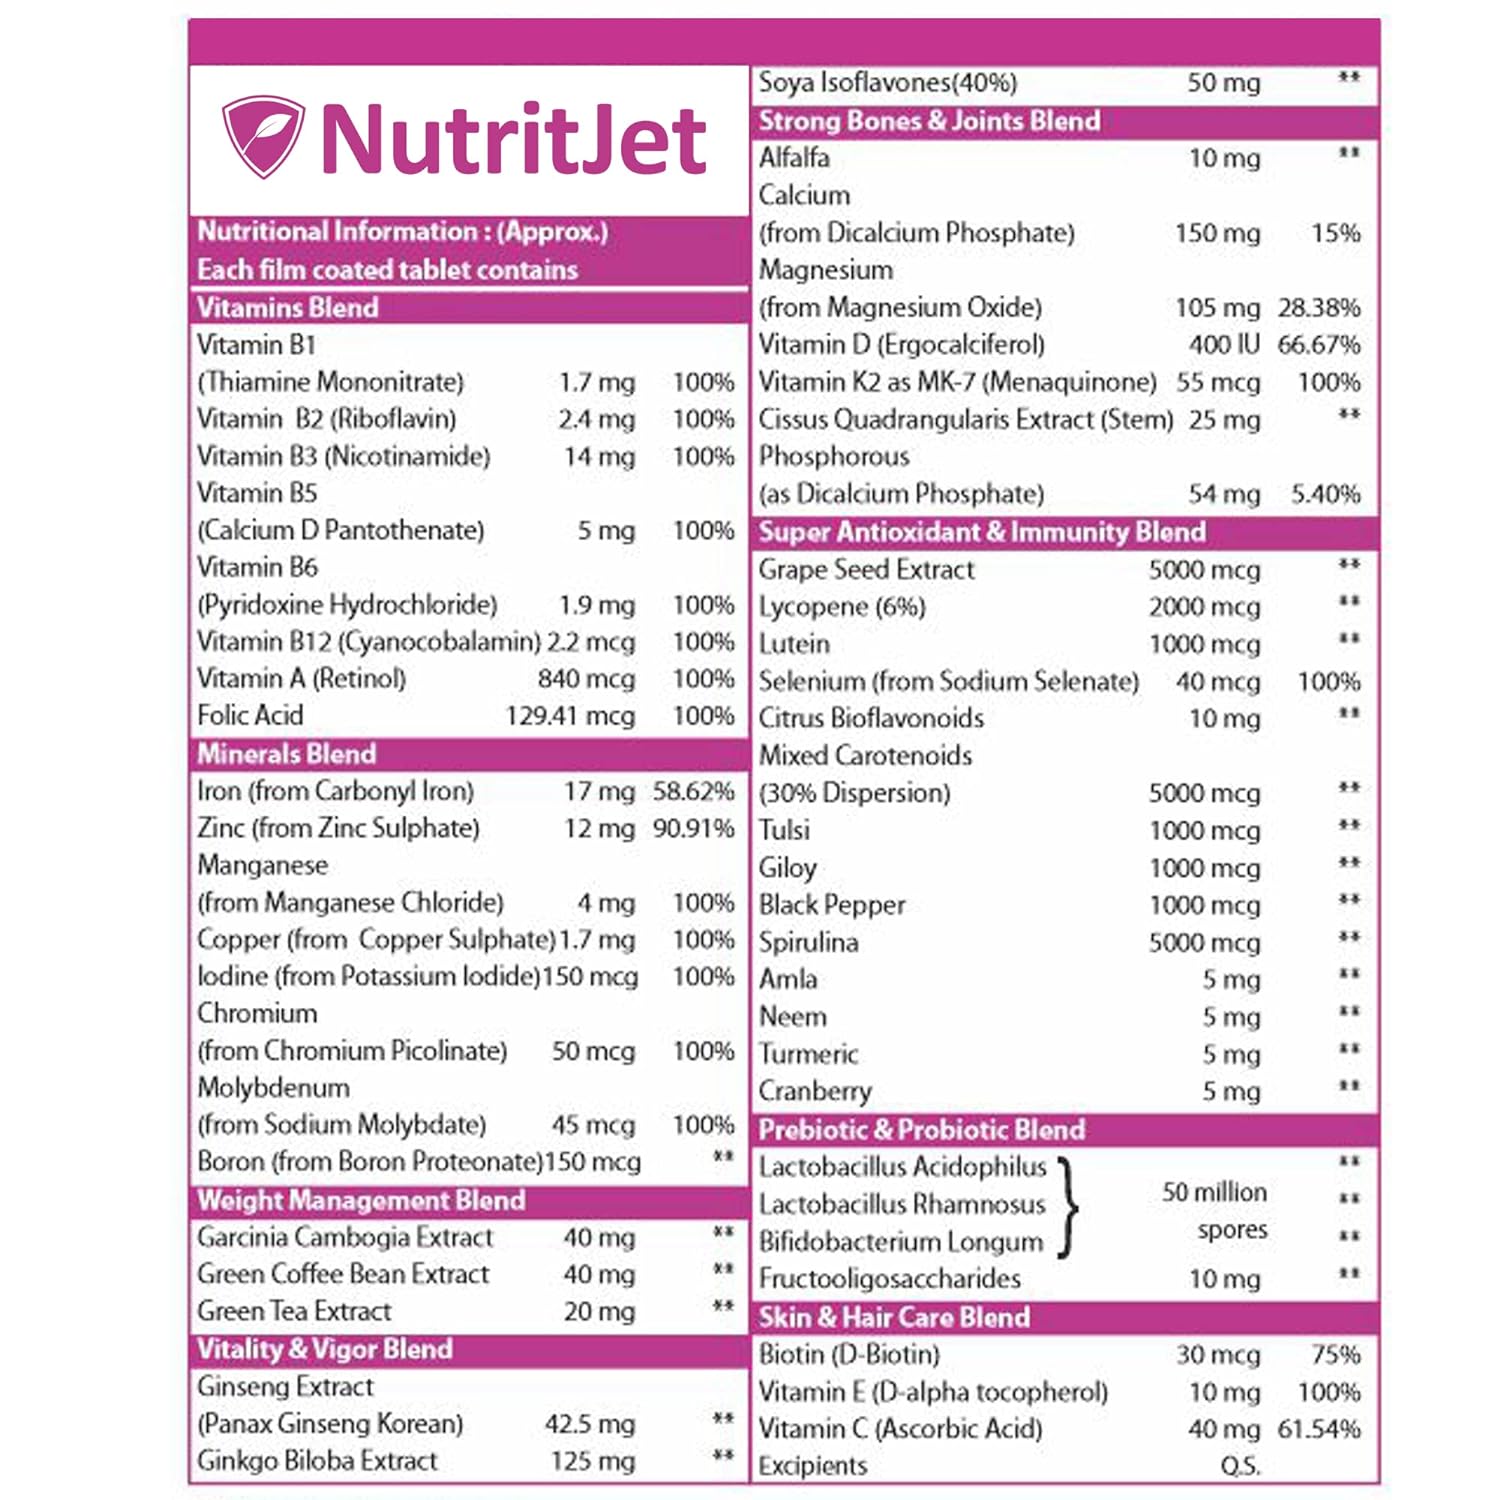 NutritJet Multivitamin For Women With Probiotics Supplement With 50 Essential Ingredients with vital Multiminerals for Immunity and Energy, Hair, Skin & Bone Support - 60 Vegetarian Tablets